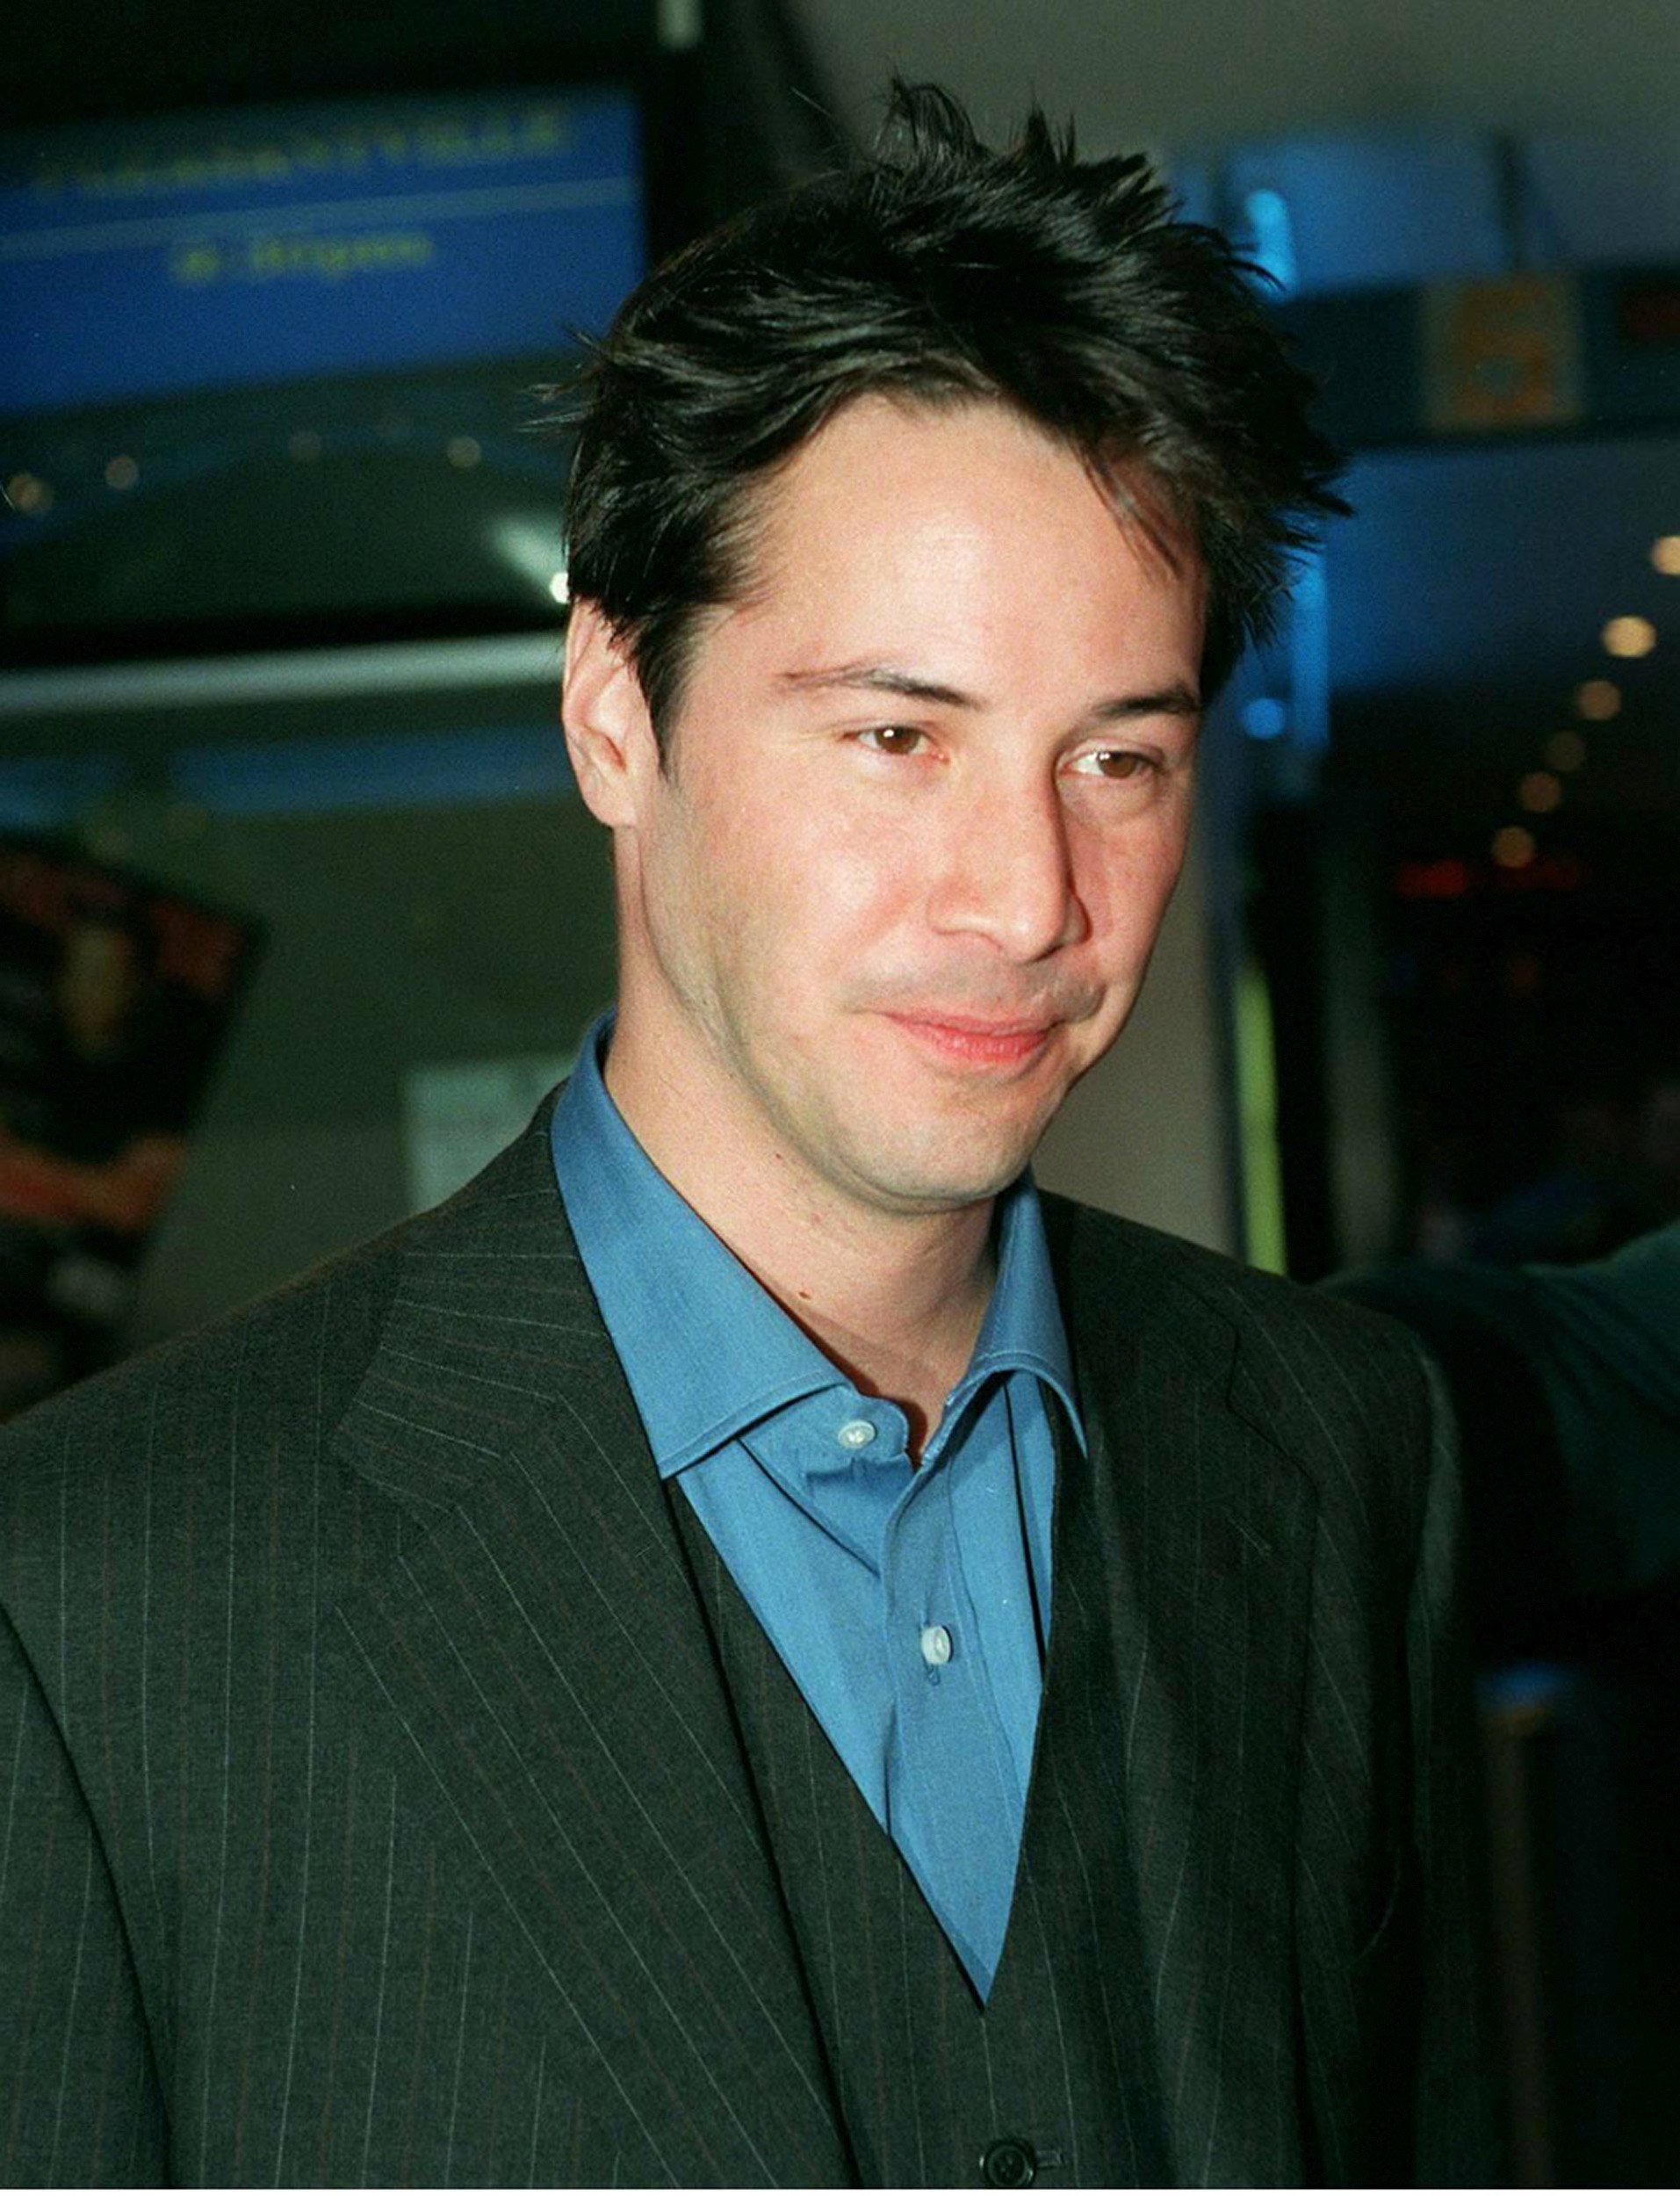 Keanu Reeves attends the Australian premiere of "The Matrix," 1999, Sydney, Australia. | Photo: Getty Images